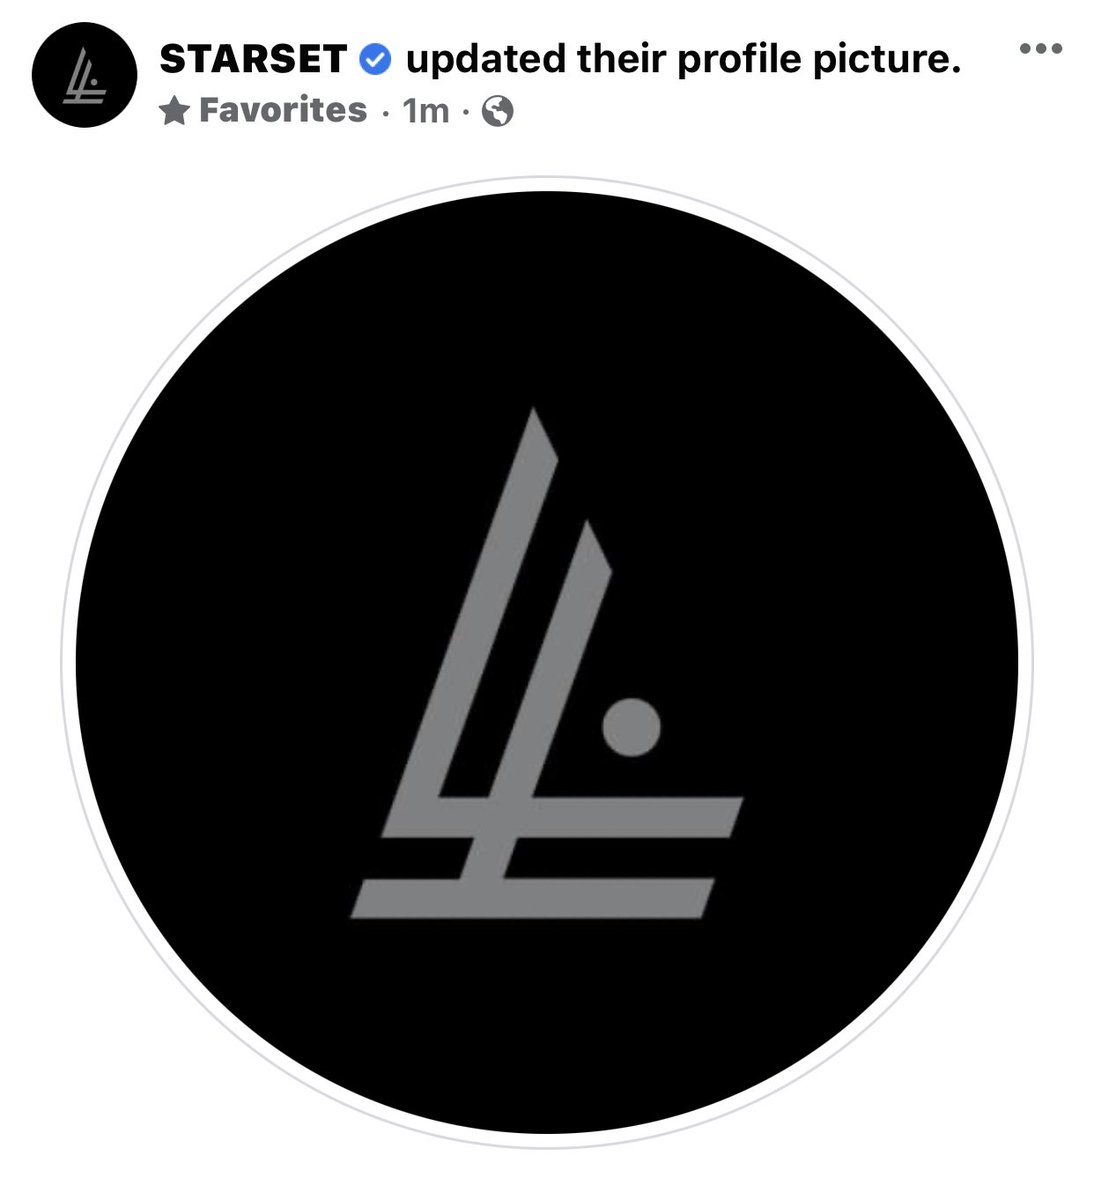 #starset has updated their profile pic on FB. 

Something is coming

#SpreadTheMessage